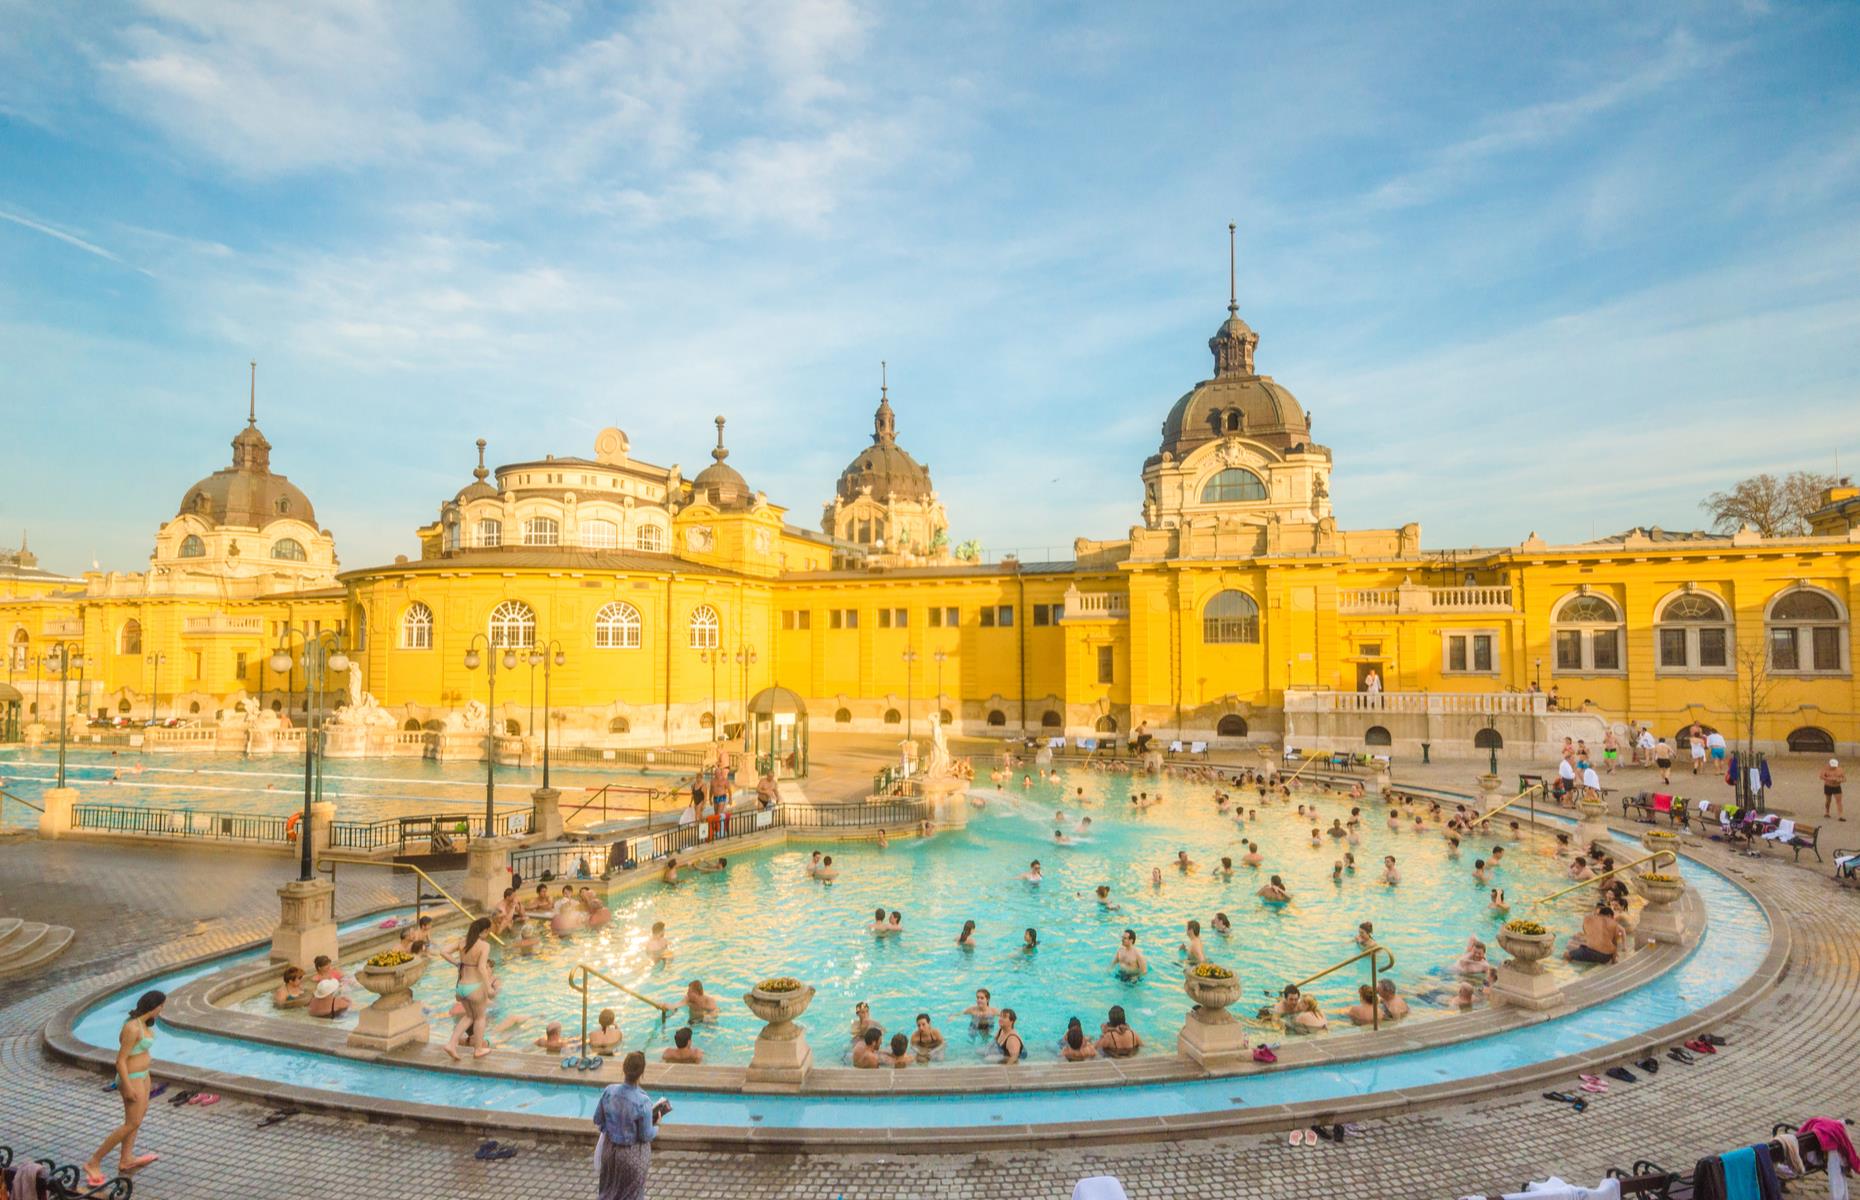 <p>Thermal spas are part of everyday life in Budapest, and a must-do on any visitor’s bucket list. At any time of year you can easily while away an afternoon in the 21 pools at Szechenyi Spa, which has waters ranging from a toasty 40°C (104°F) to a more bracing 18°C (64°F), as well as saunas and massages. For a more hedonistic vibe, head to one of their night parties – or sparties, as they’re known. </p>